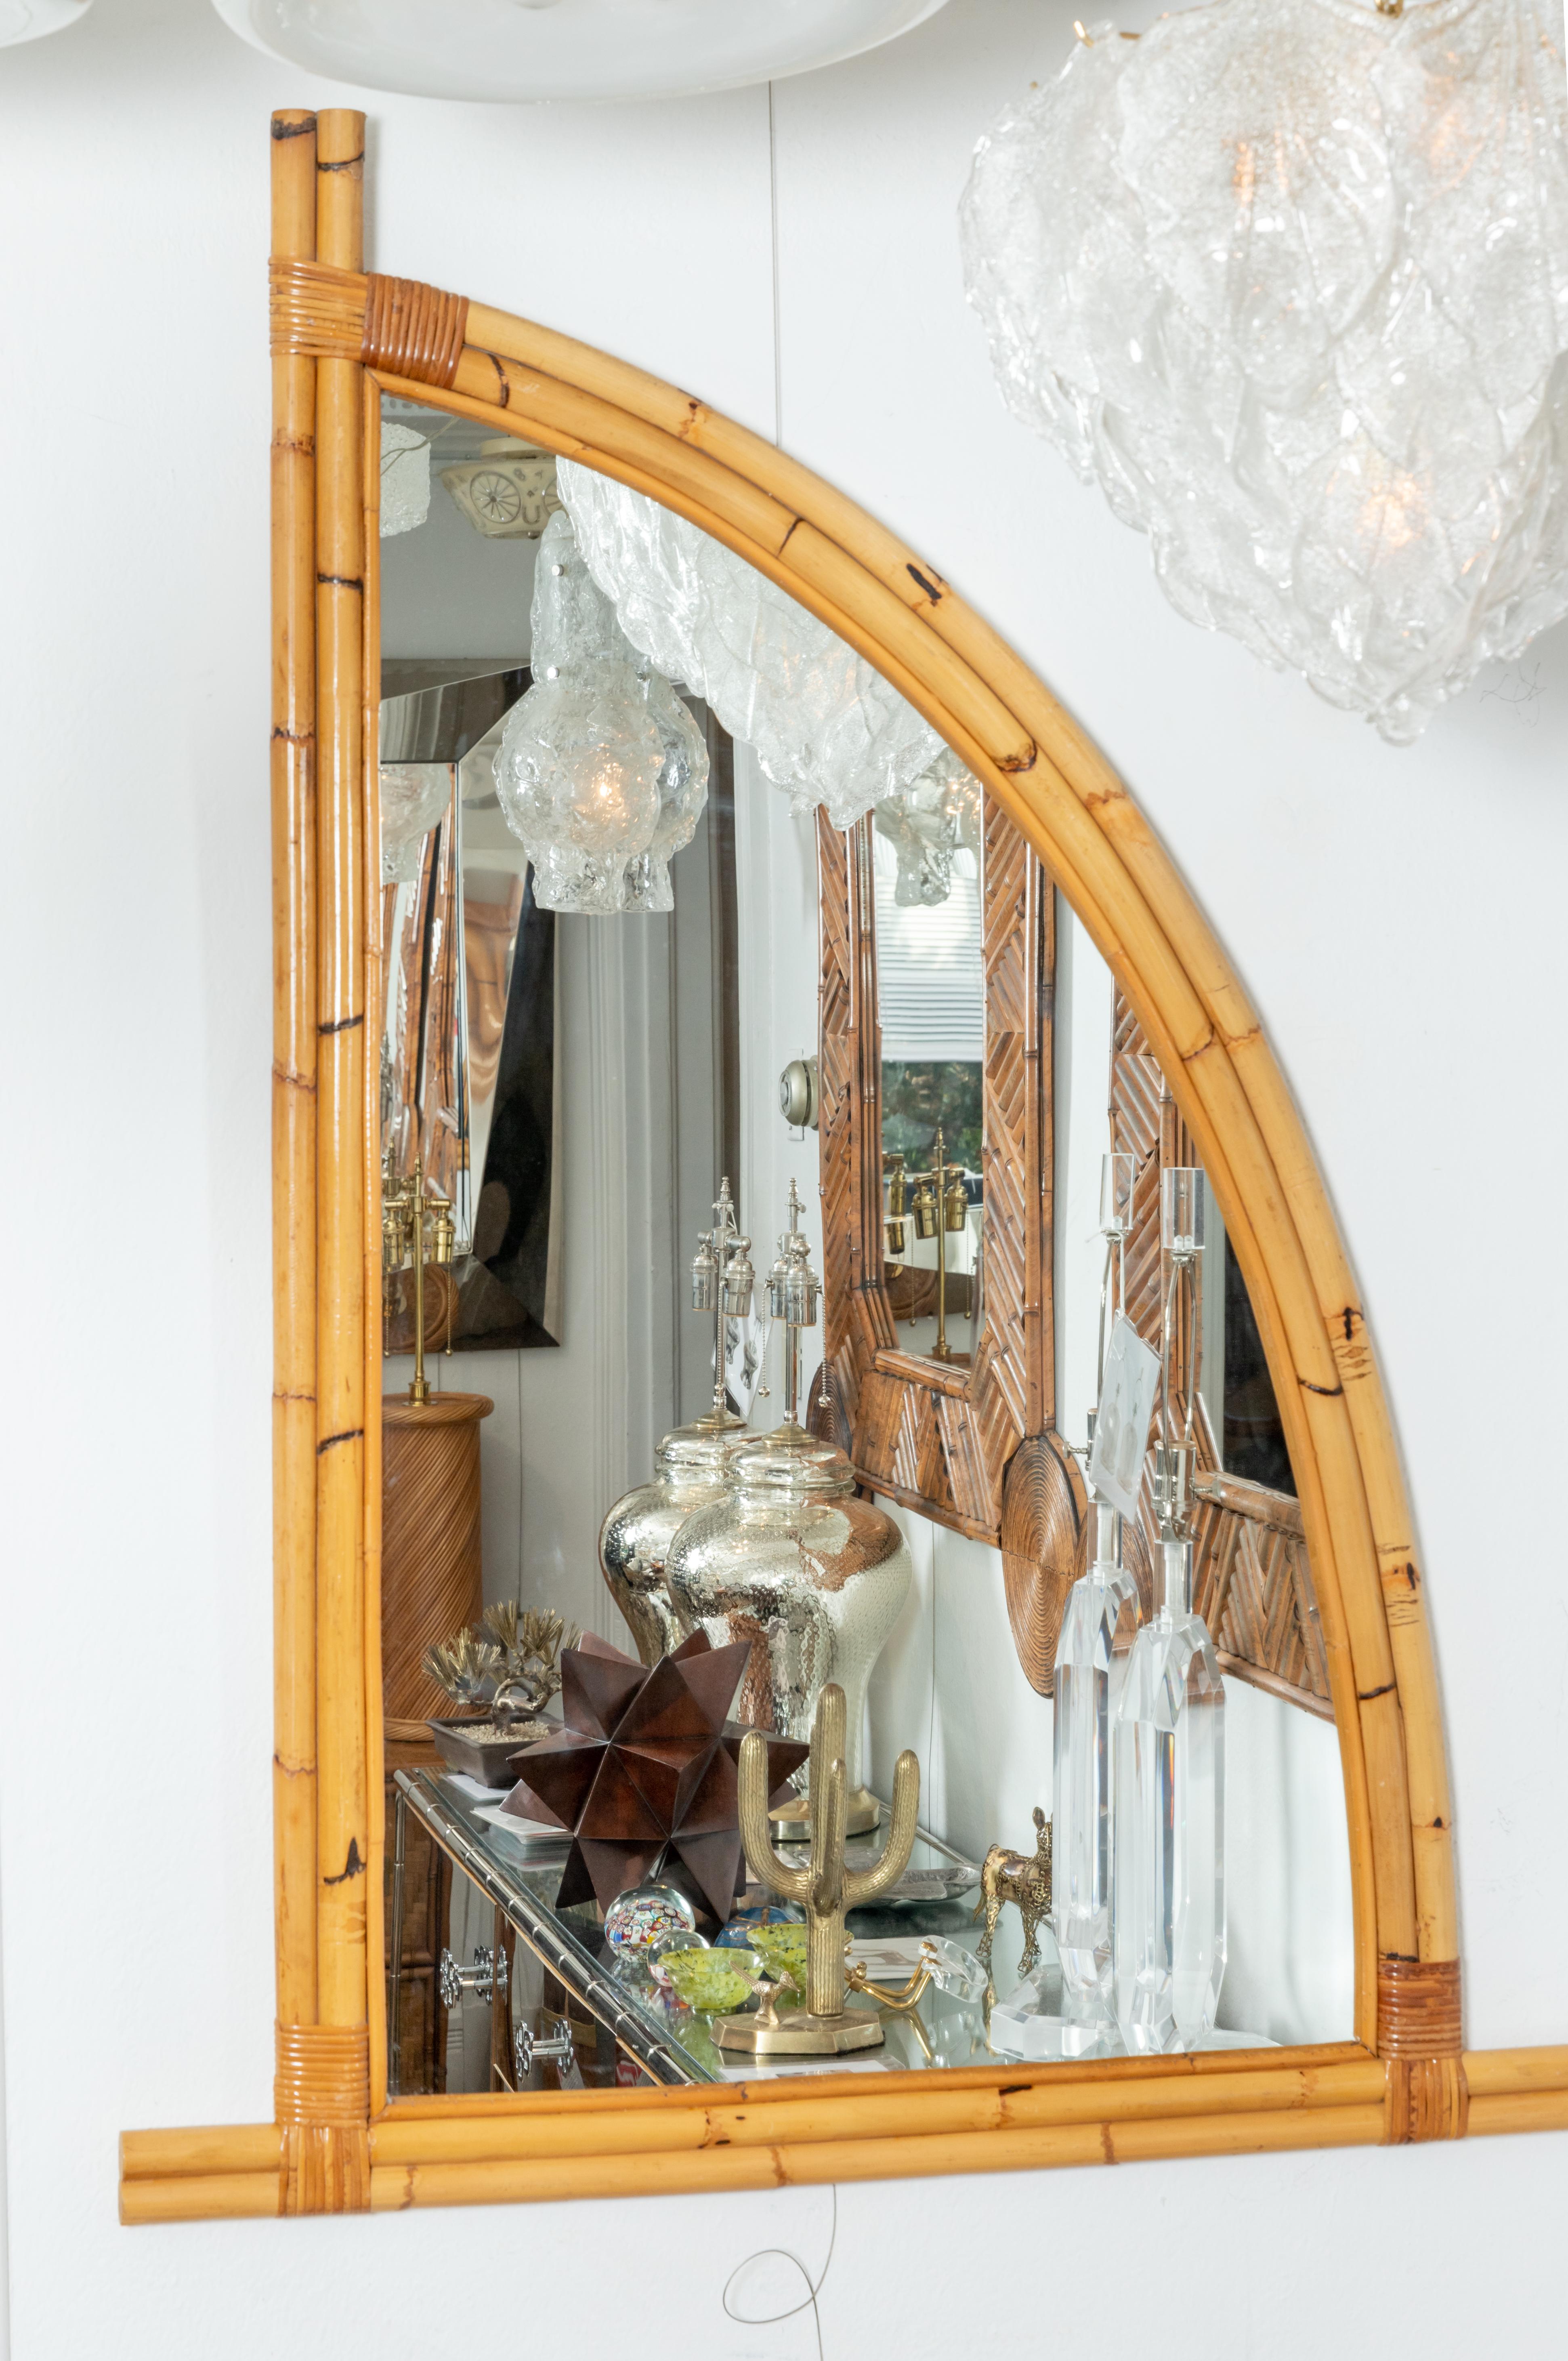 Unusual shaped bamboo mirrors (Left and right available, right is shown).